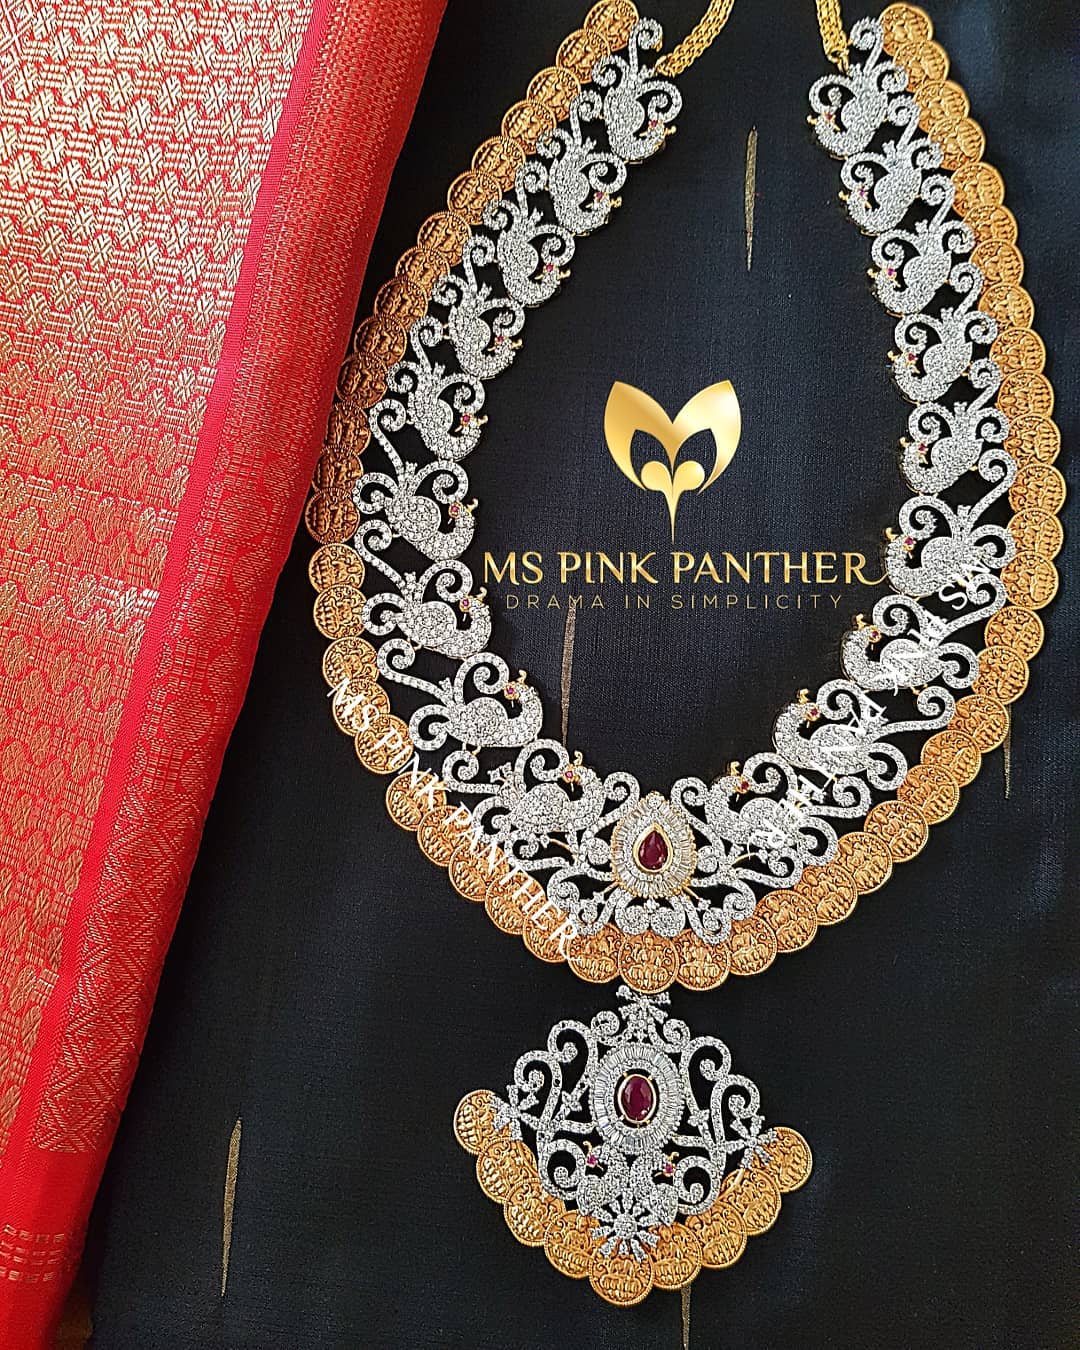 Eye Catching Long Necklace From Ms Pink Panthers